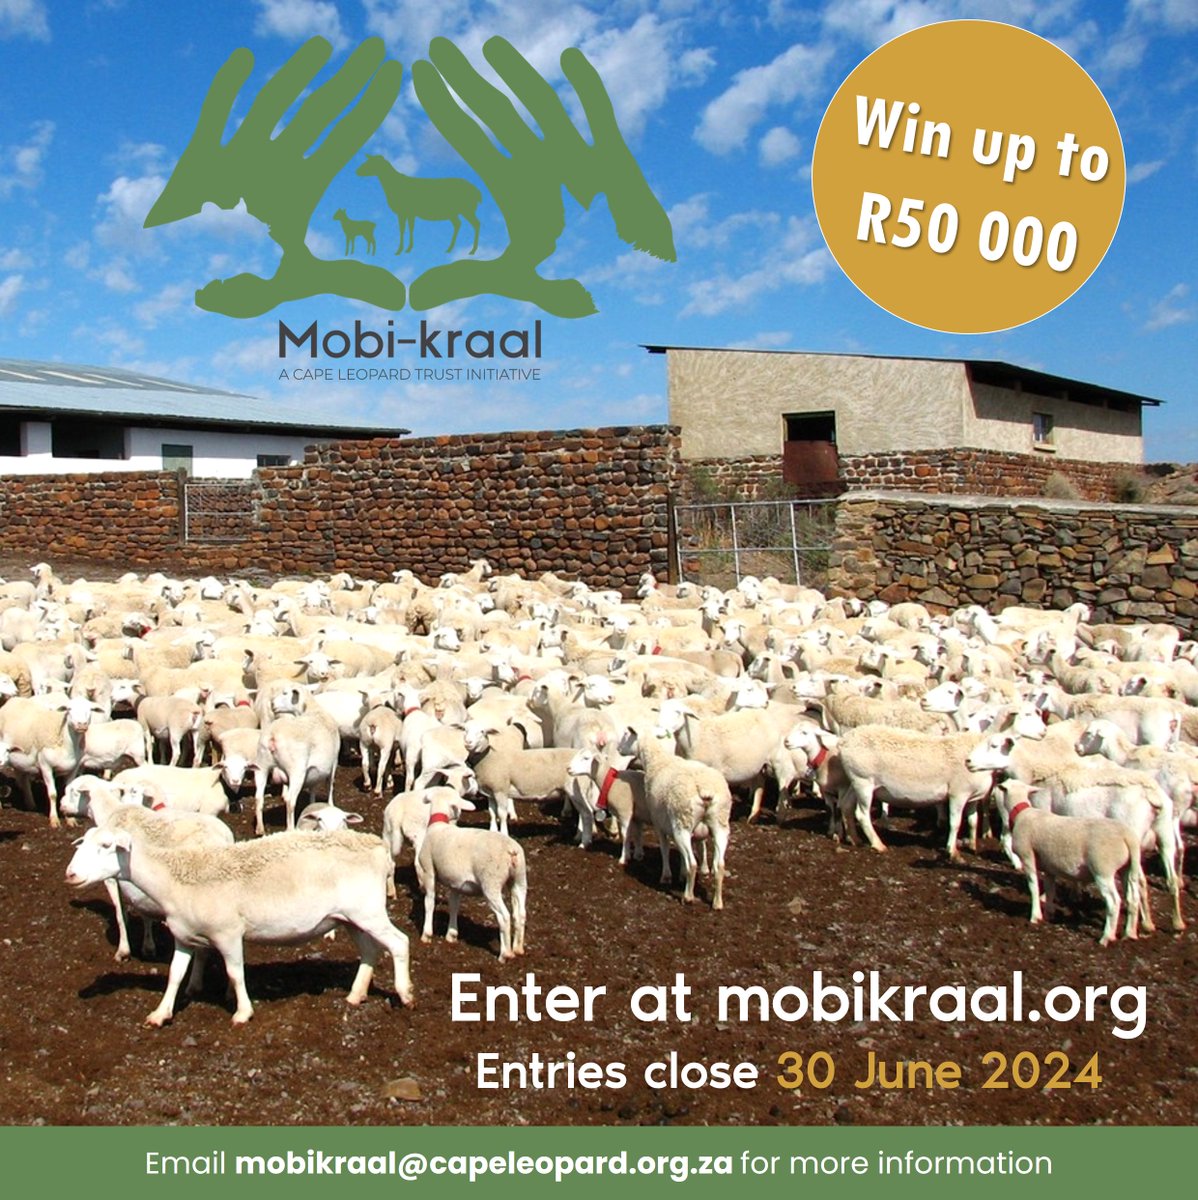 The #Mobikraal challenge closes in 5️⃣0️⃣ days!
Do you have the skills and vision to design a livestock enclosure that is affordable, safe, durable, portable and predator-proof? Then we want to hear from you!
#mobikraal #mobilekraal #mobilecorral #coexistence